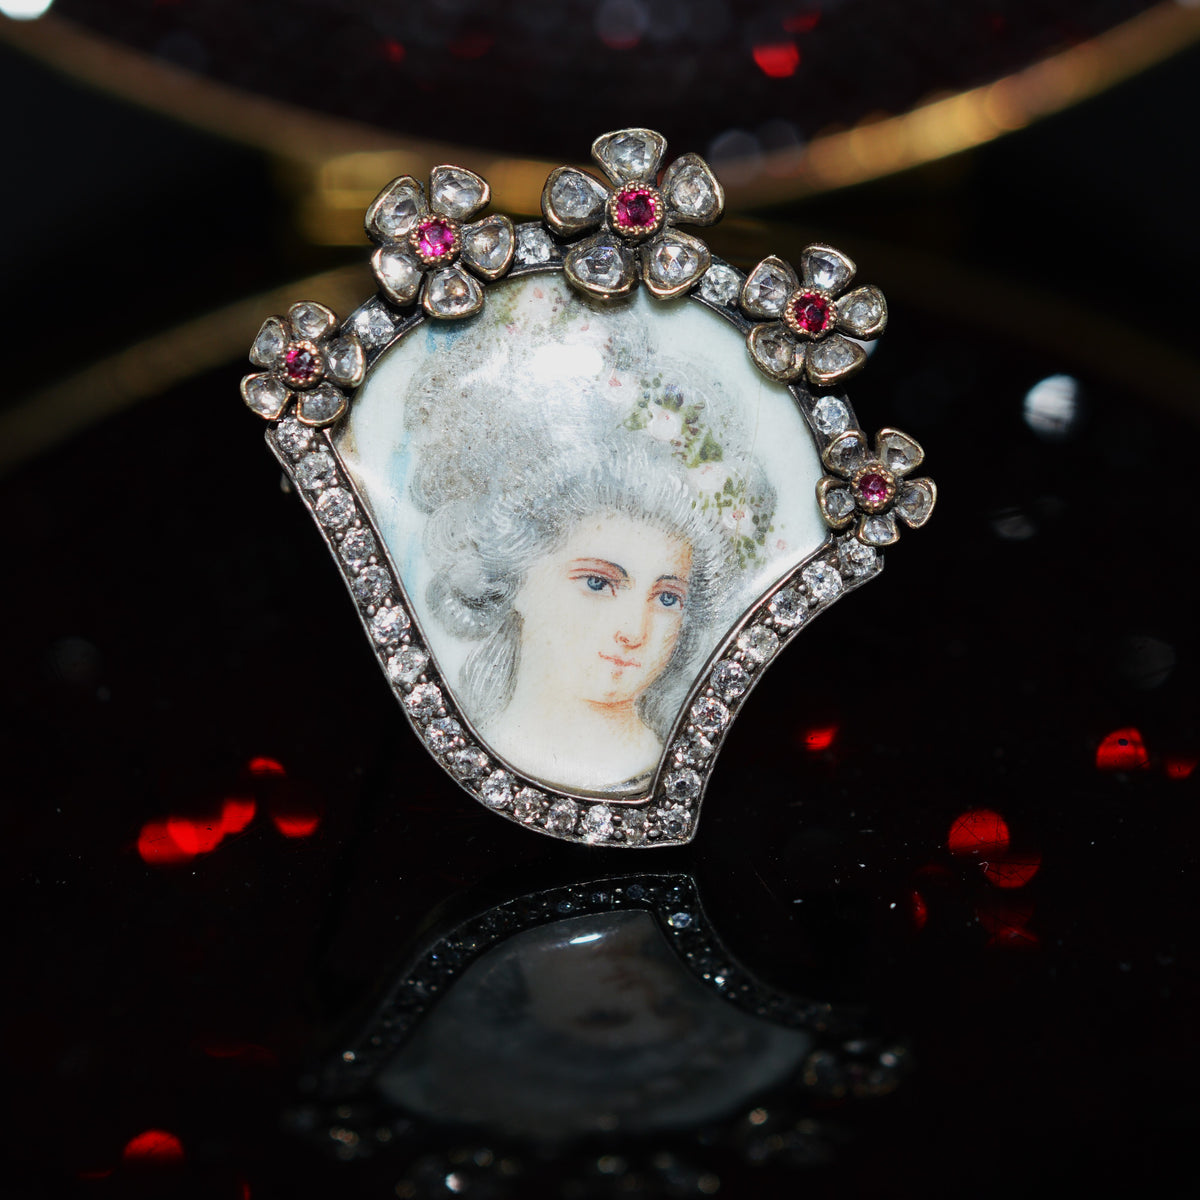 Silver Topped 18K Yellow Gold Georgian Portrait Brooch With Rubies and Diamonds